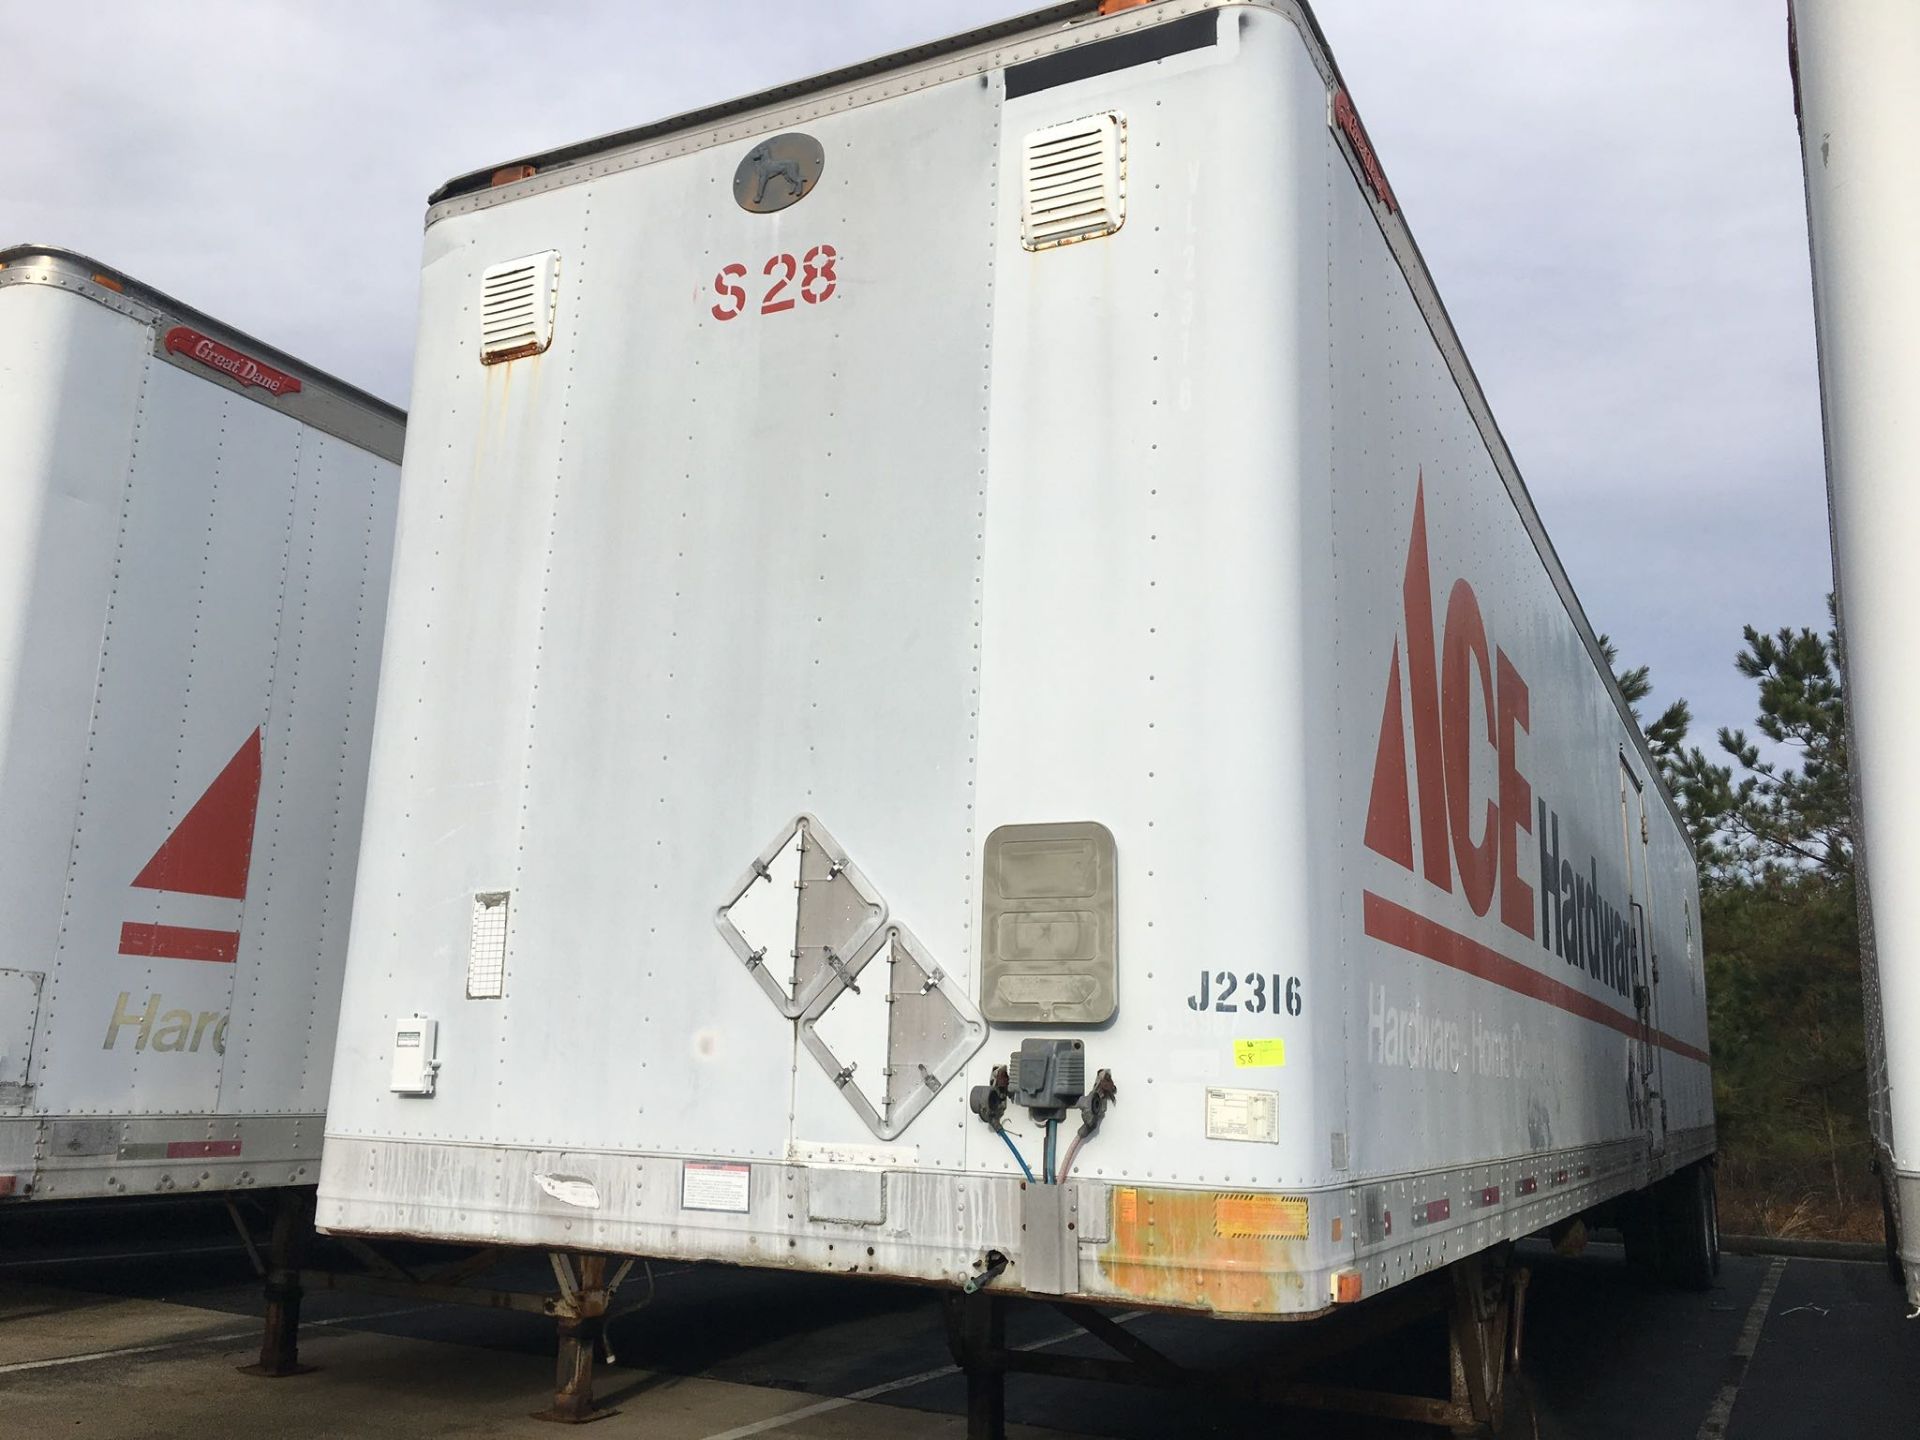 Trailer, Make: Great Dane. Year: 1995. Trailer #: S28. VIN: 1GRAA9623TBO52316. Sold with a Bill of